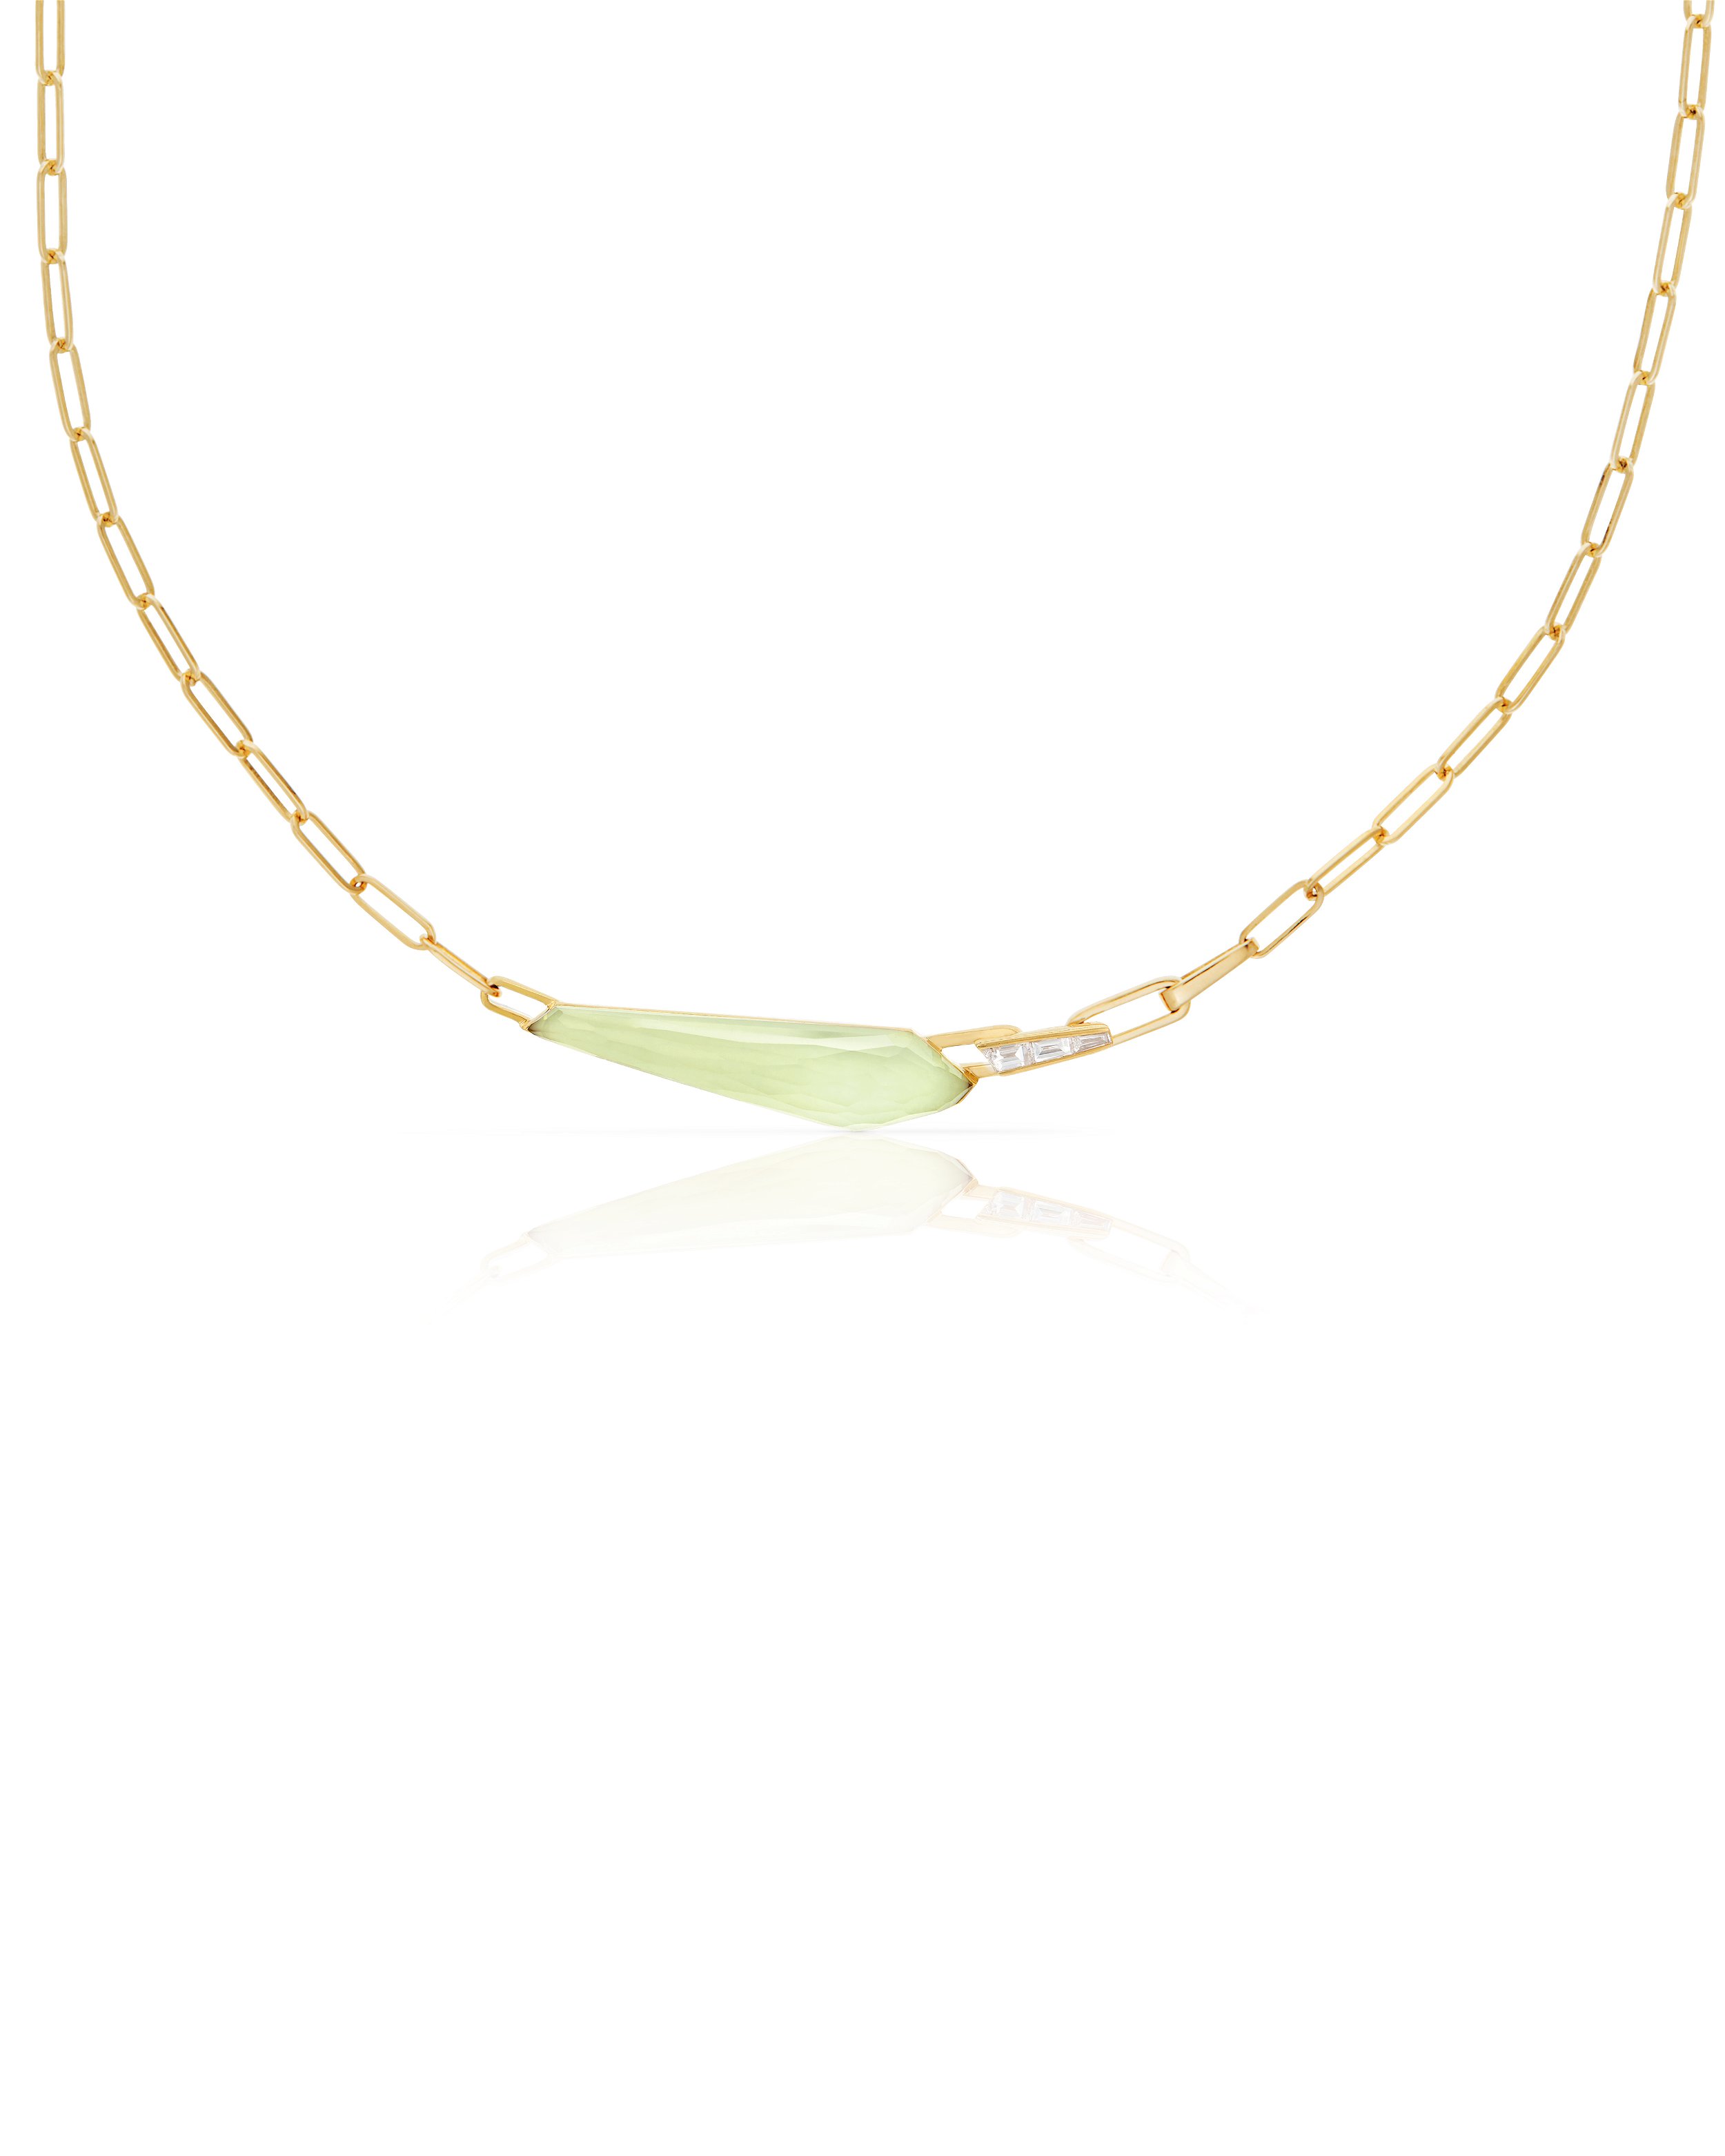 CH2 Shard Slimline Linked Choker Necklace with Chrysolemon in 18kt Yellow Gold - 16.5"